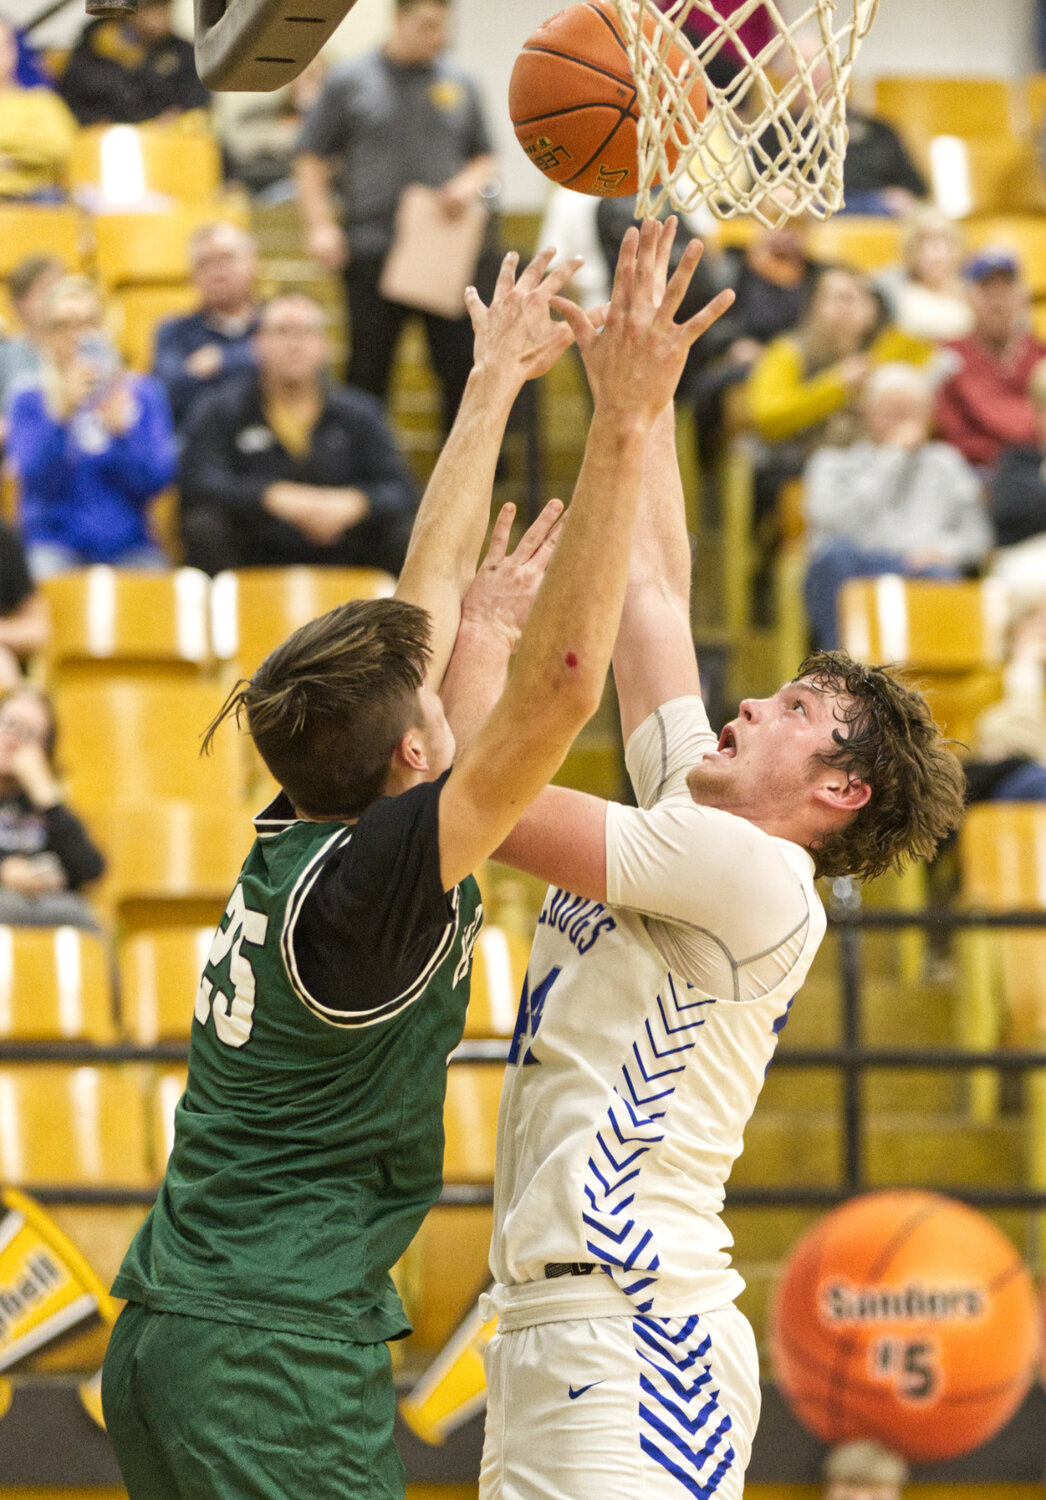 New Franklin senior Connor Wilmsmeyer goes up for a contested shot against Westran junior Marshall Kitchen.